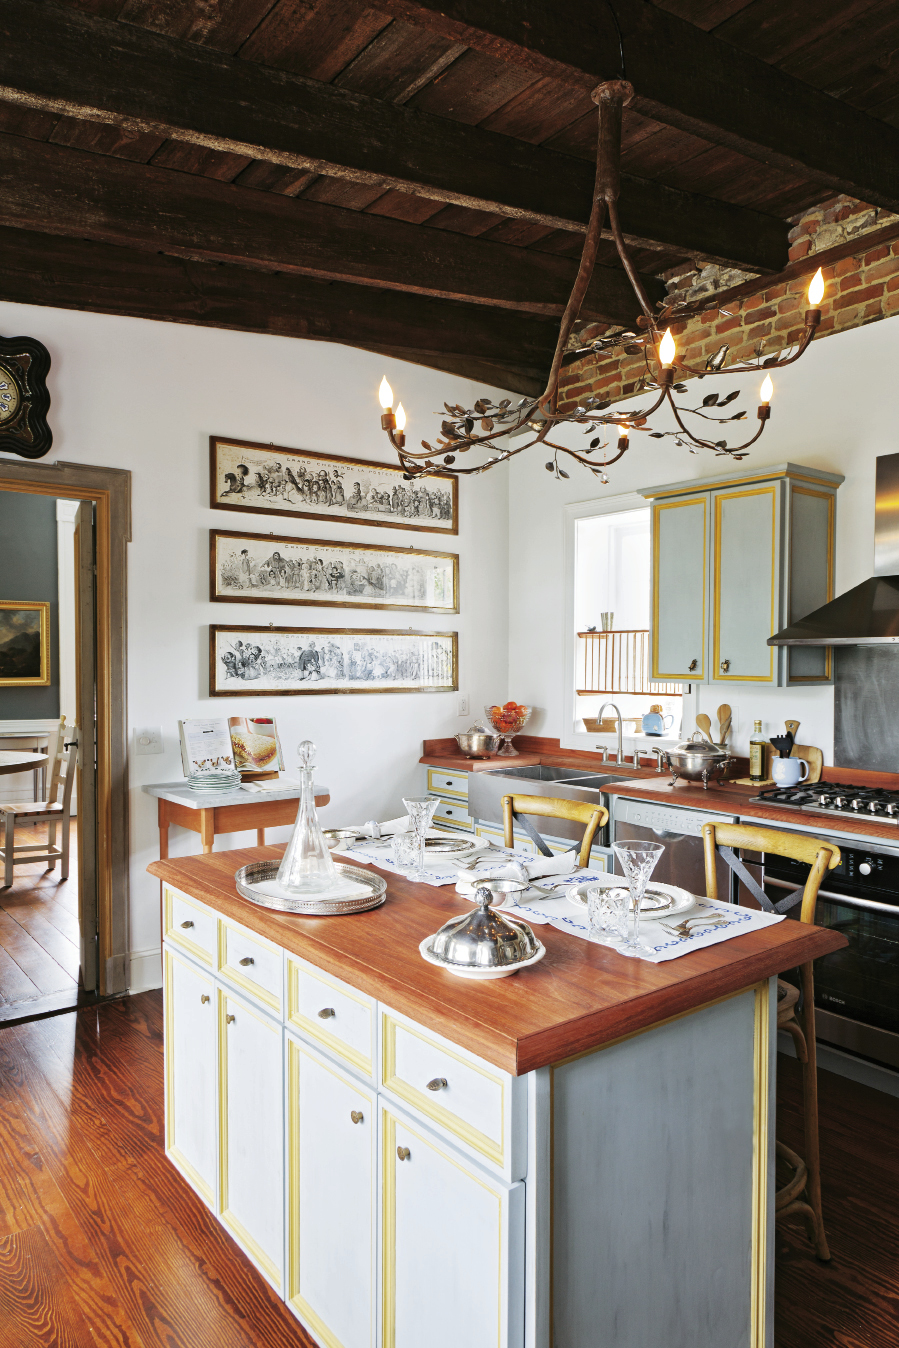 The kitchen  island was built in the style of old Tuscan cupboards by local firm Perrin Woodworking; the chandelier is by Umbrian blacksmith  Alberto Alunni.